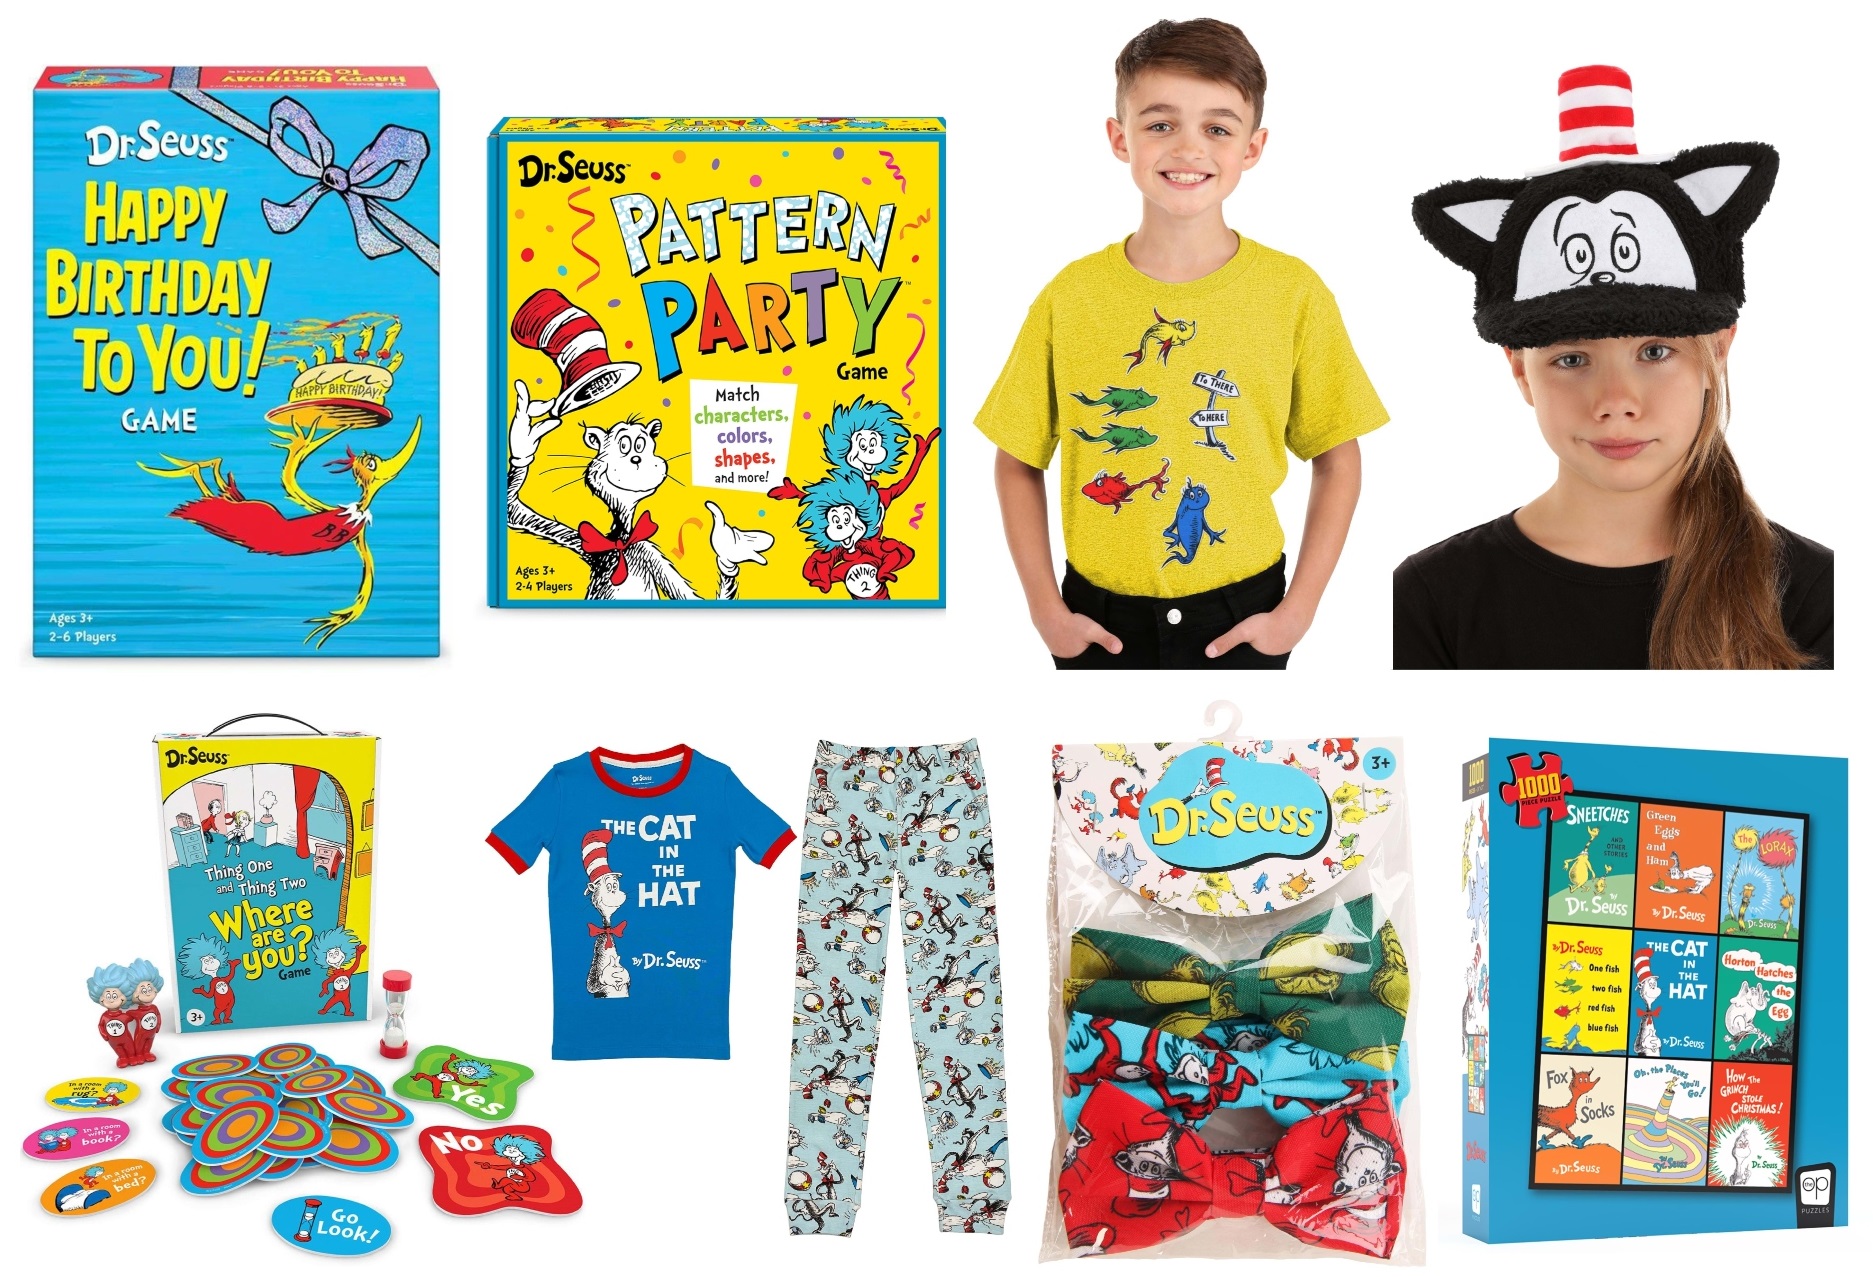 Dr. Seuss Gifts for Kids